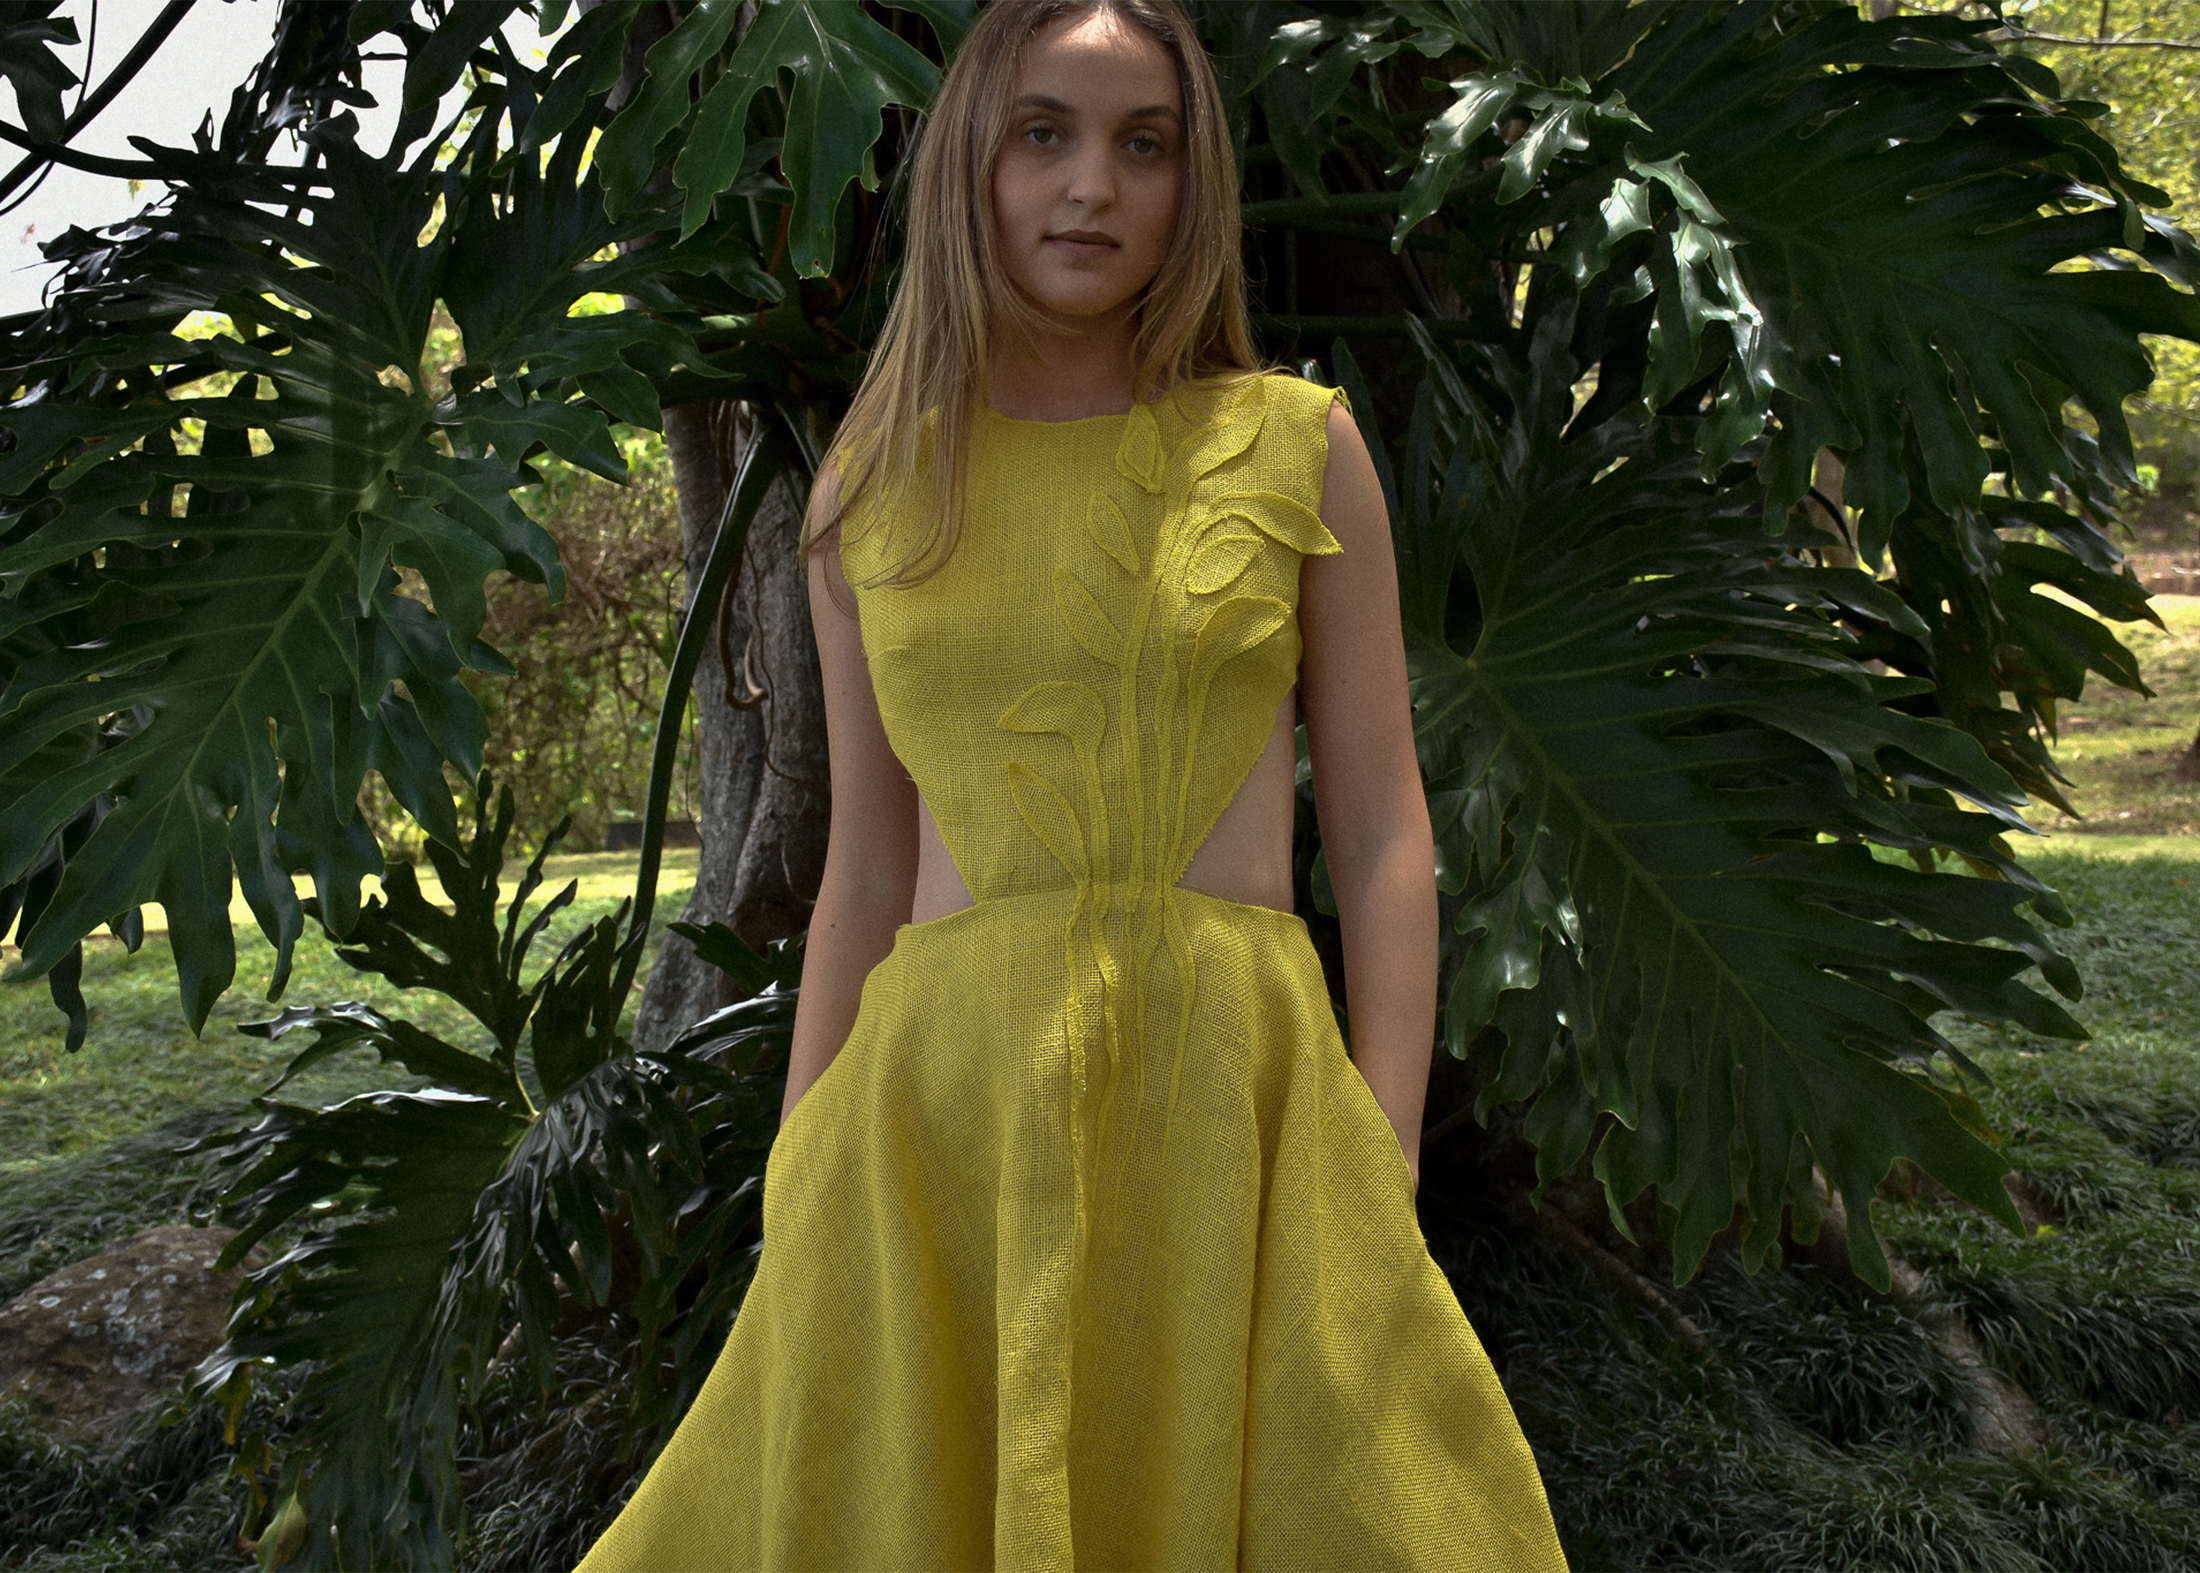 Yellow burlap dress, hand-embroidered with yellow burlap leaf appliqués. Model is standing in front of a big tree full of monstera leaves.